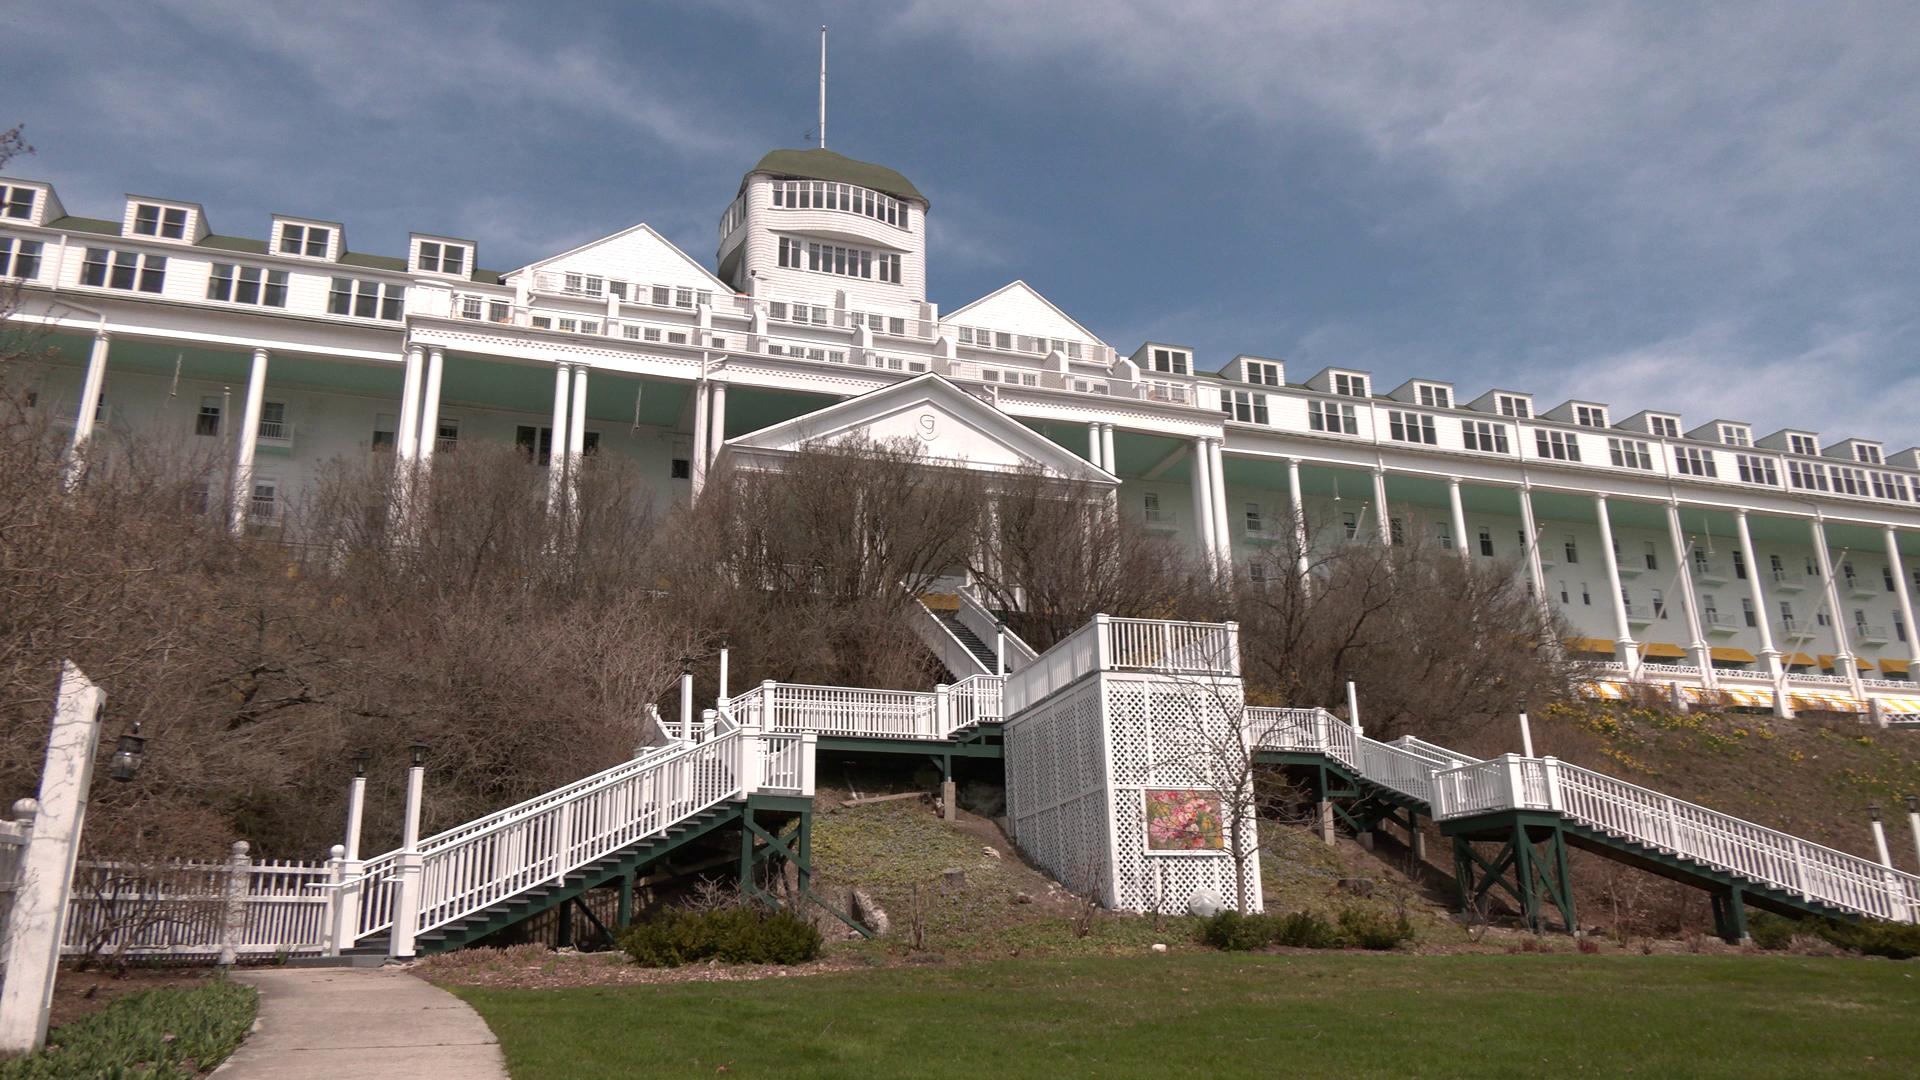 Grand Hotel gets ready to officially open for its 138th season